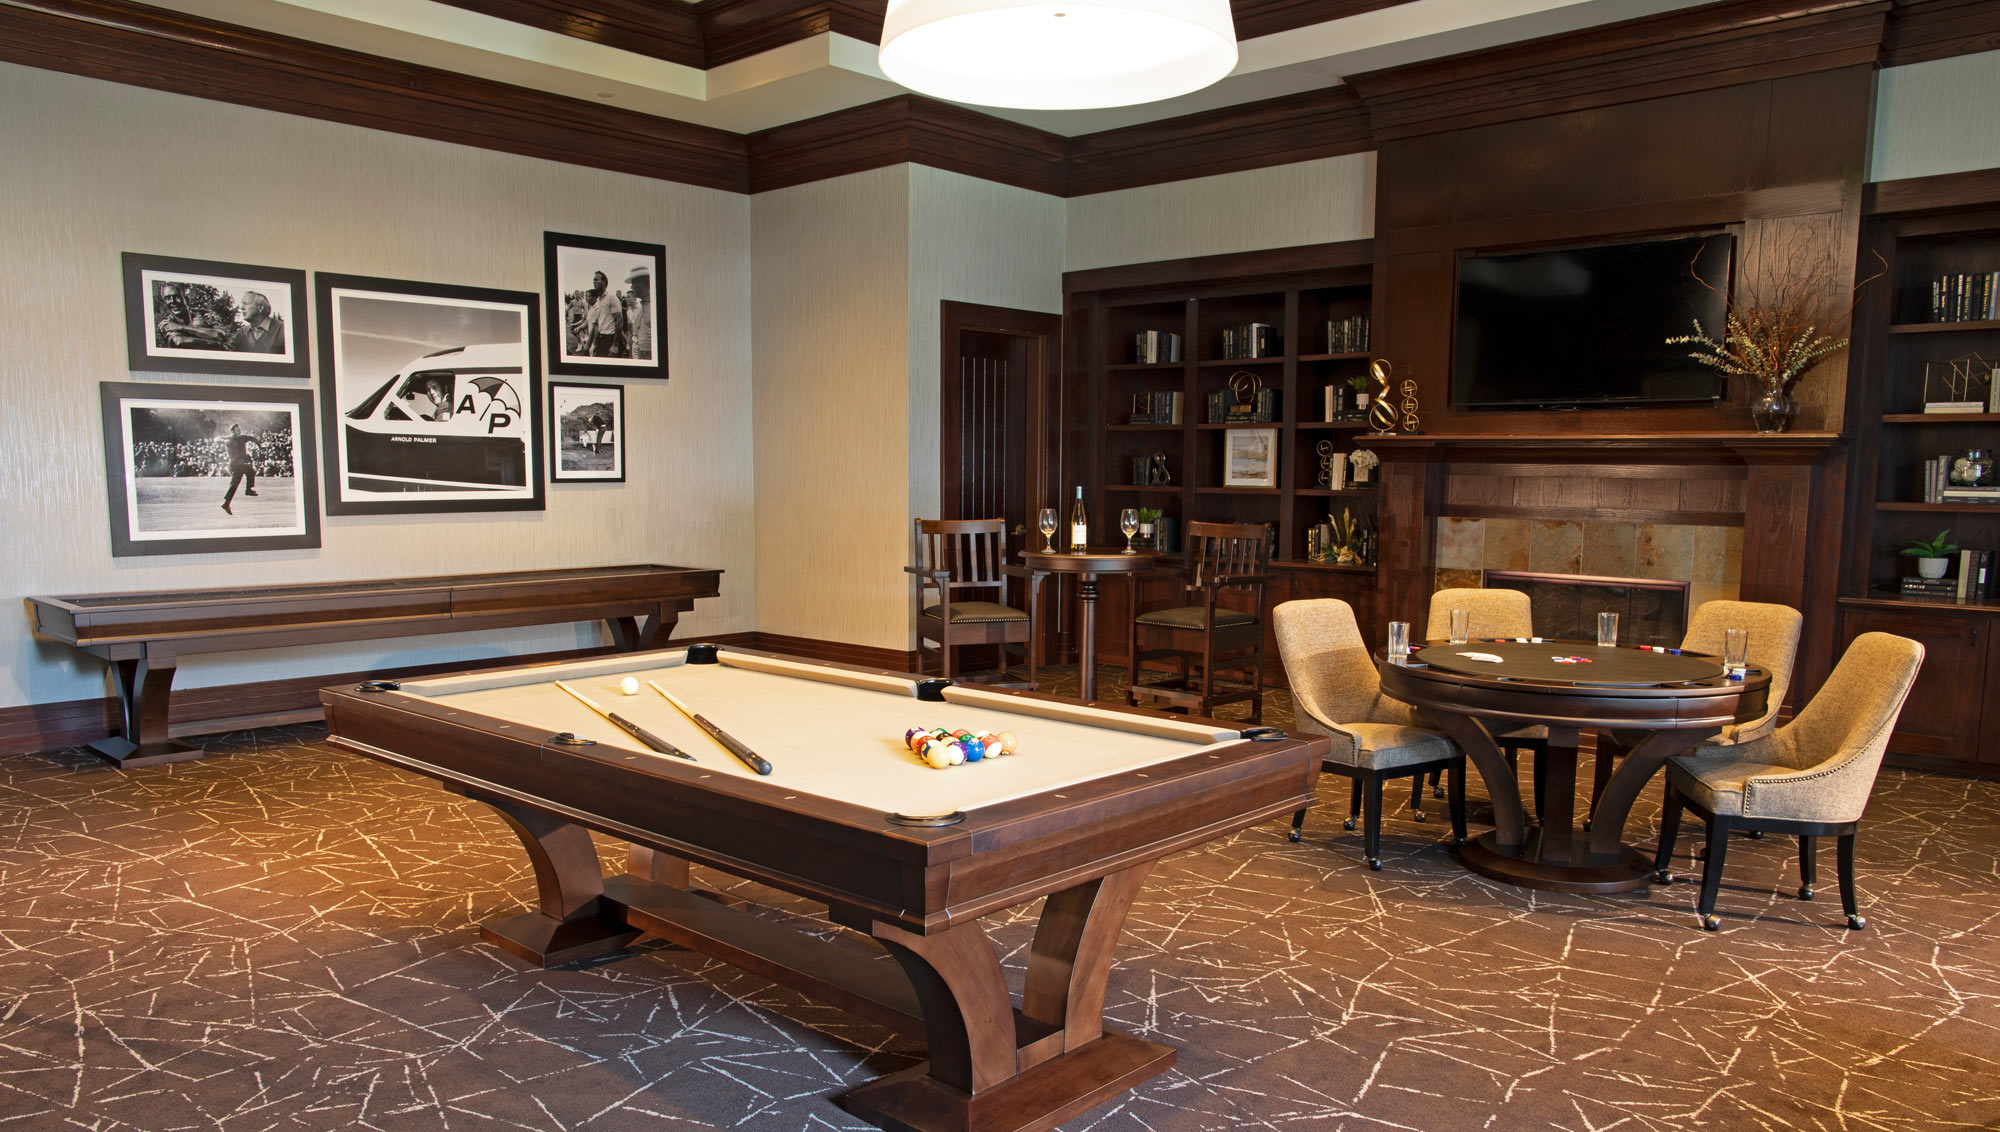 Recreation room with billiards table